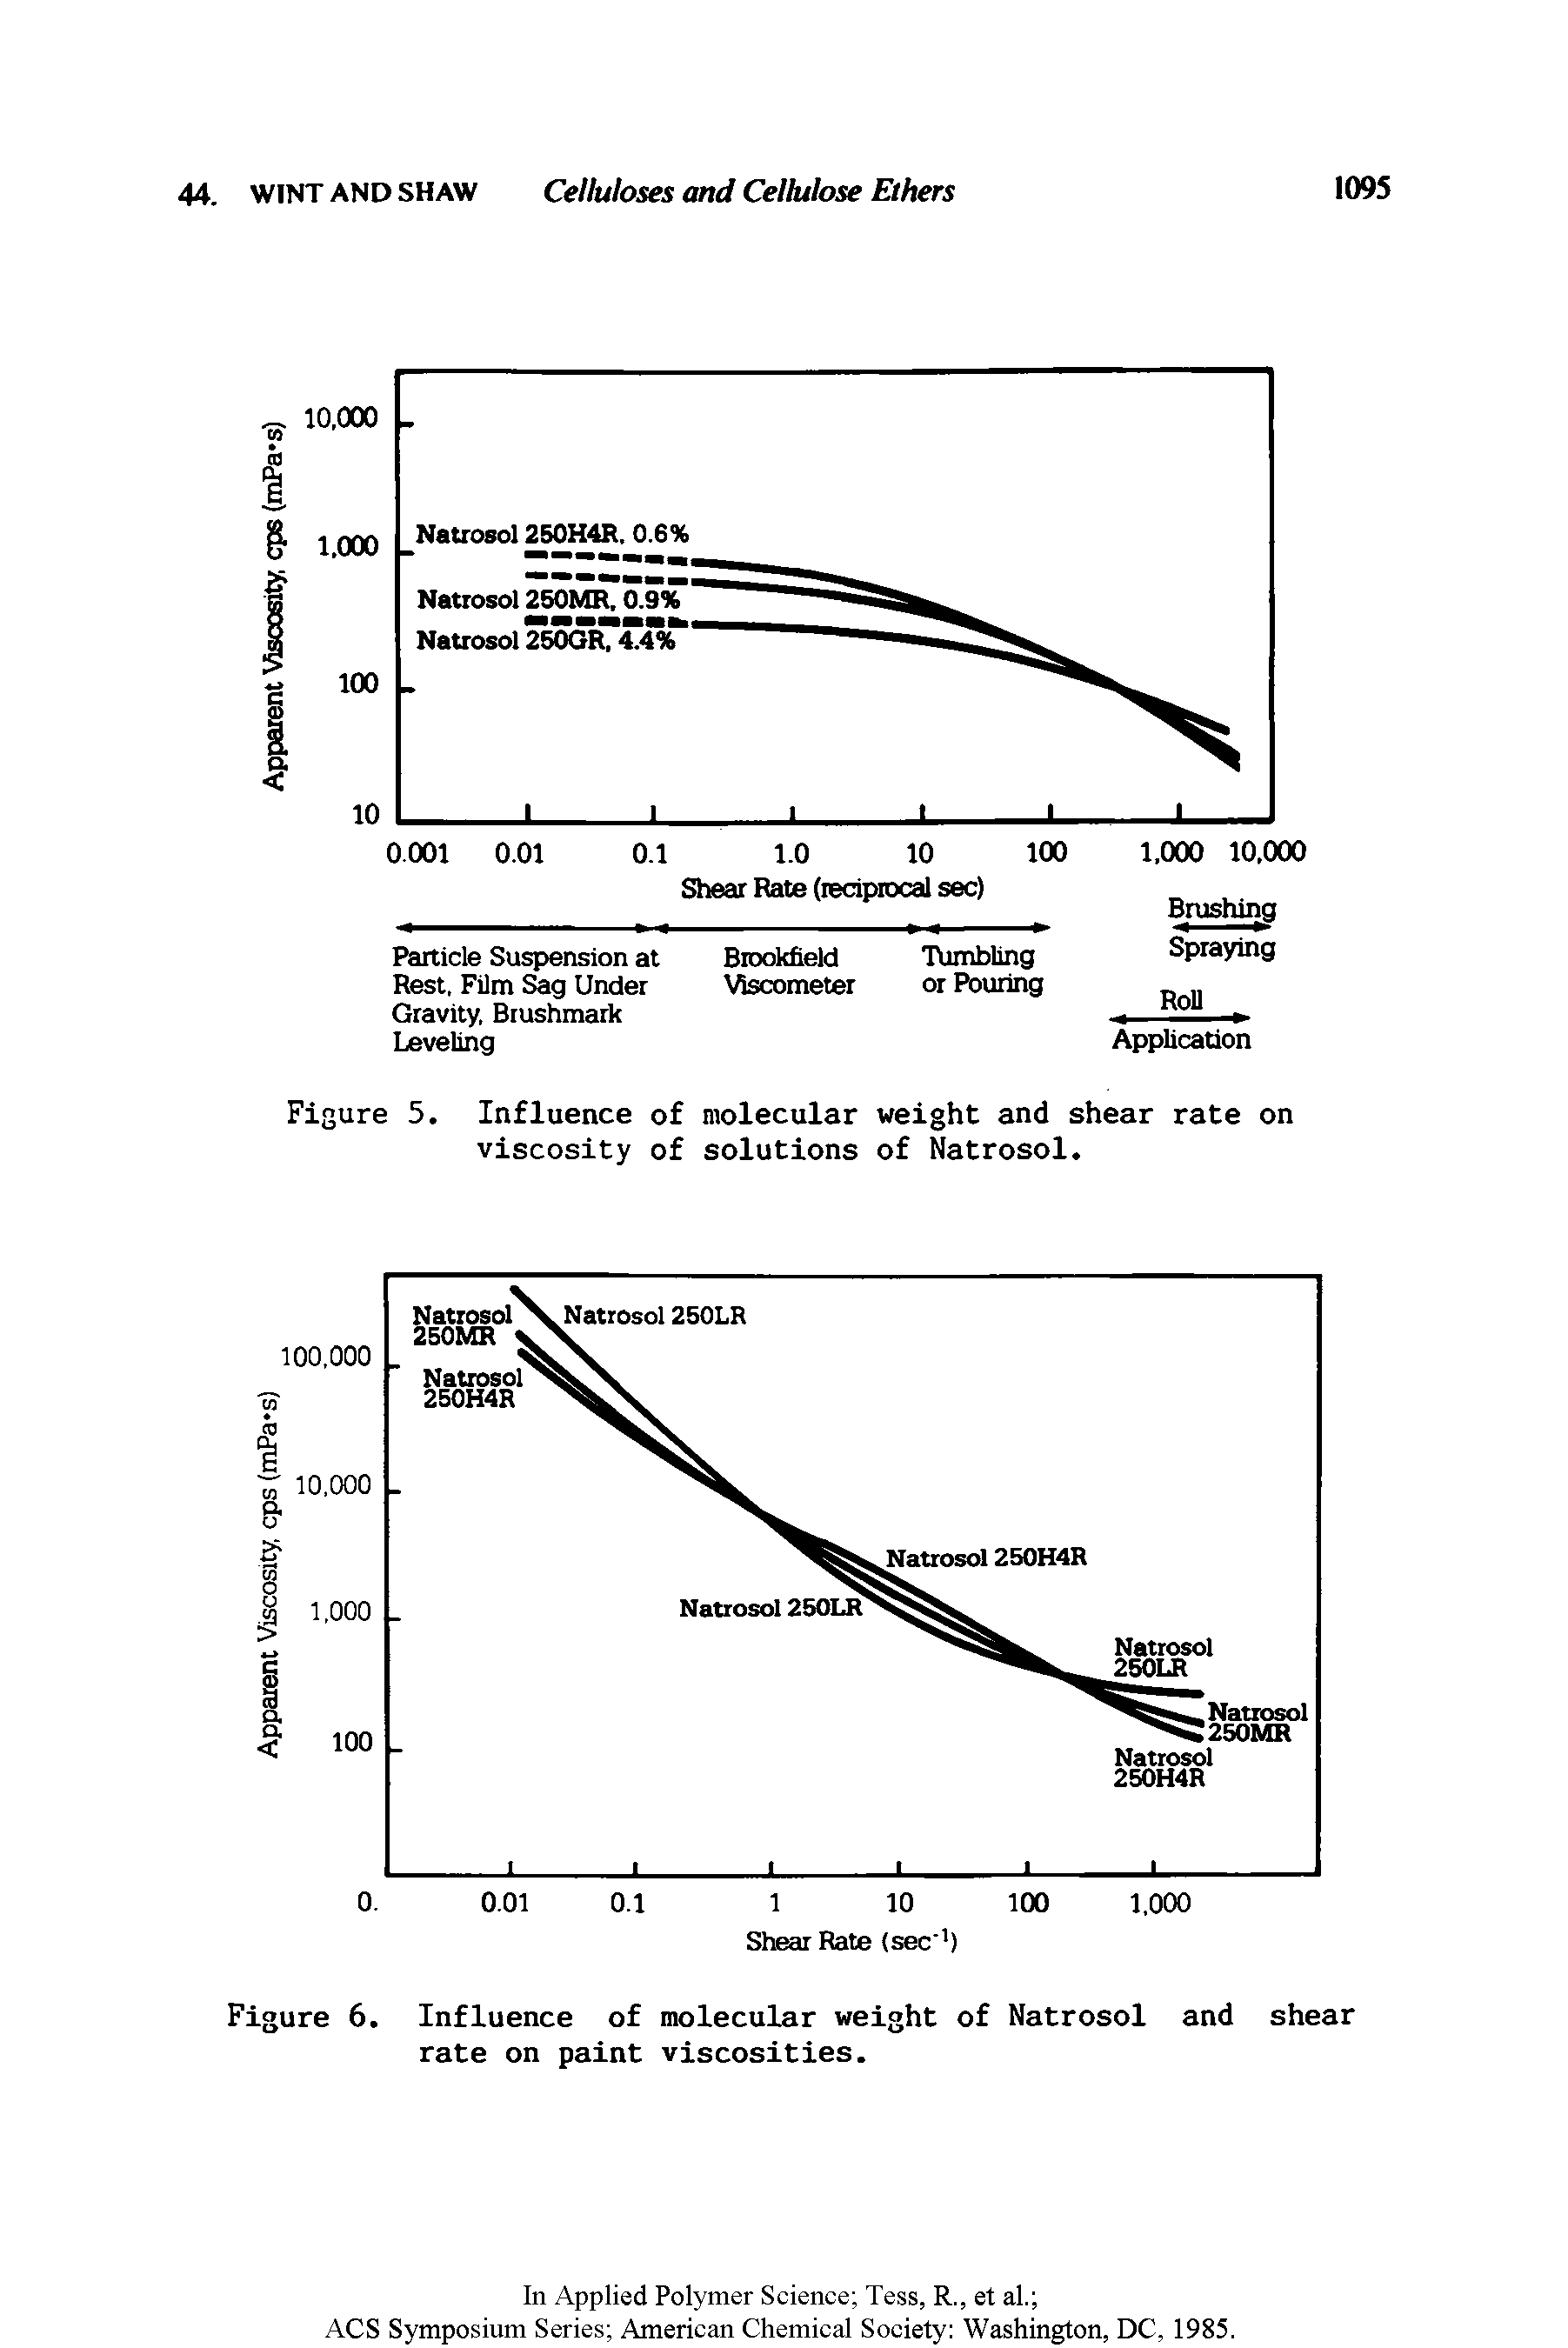 Figure 5. Influence of molecular weight and shear rate on viscosity of solutions of Natrosol.